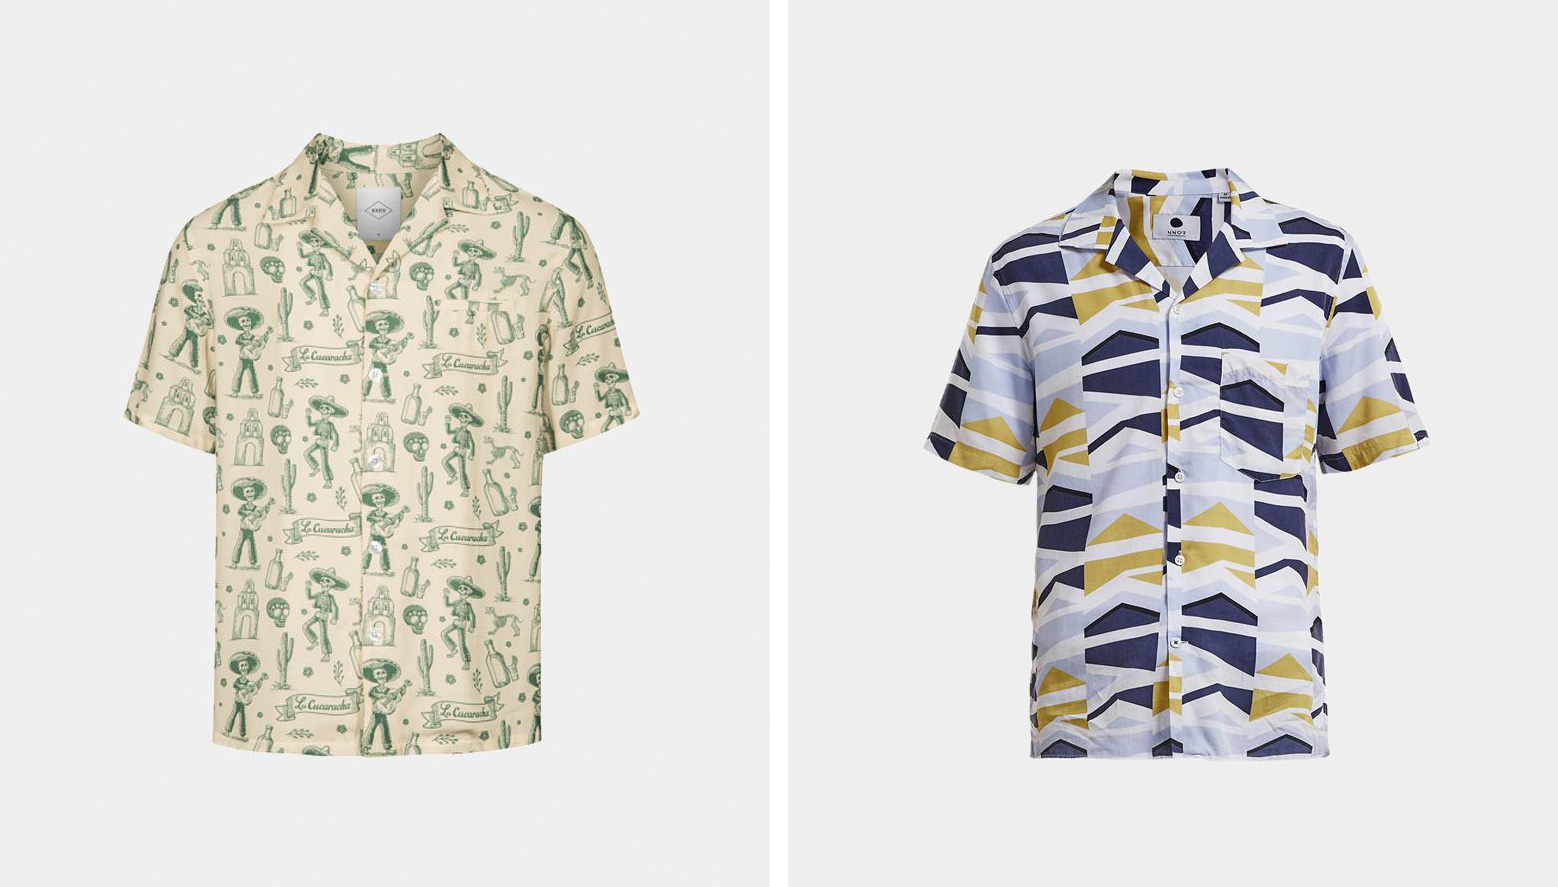 5 Printed Shirts To Wear For Summer 2020 | OPUMO Magazine